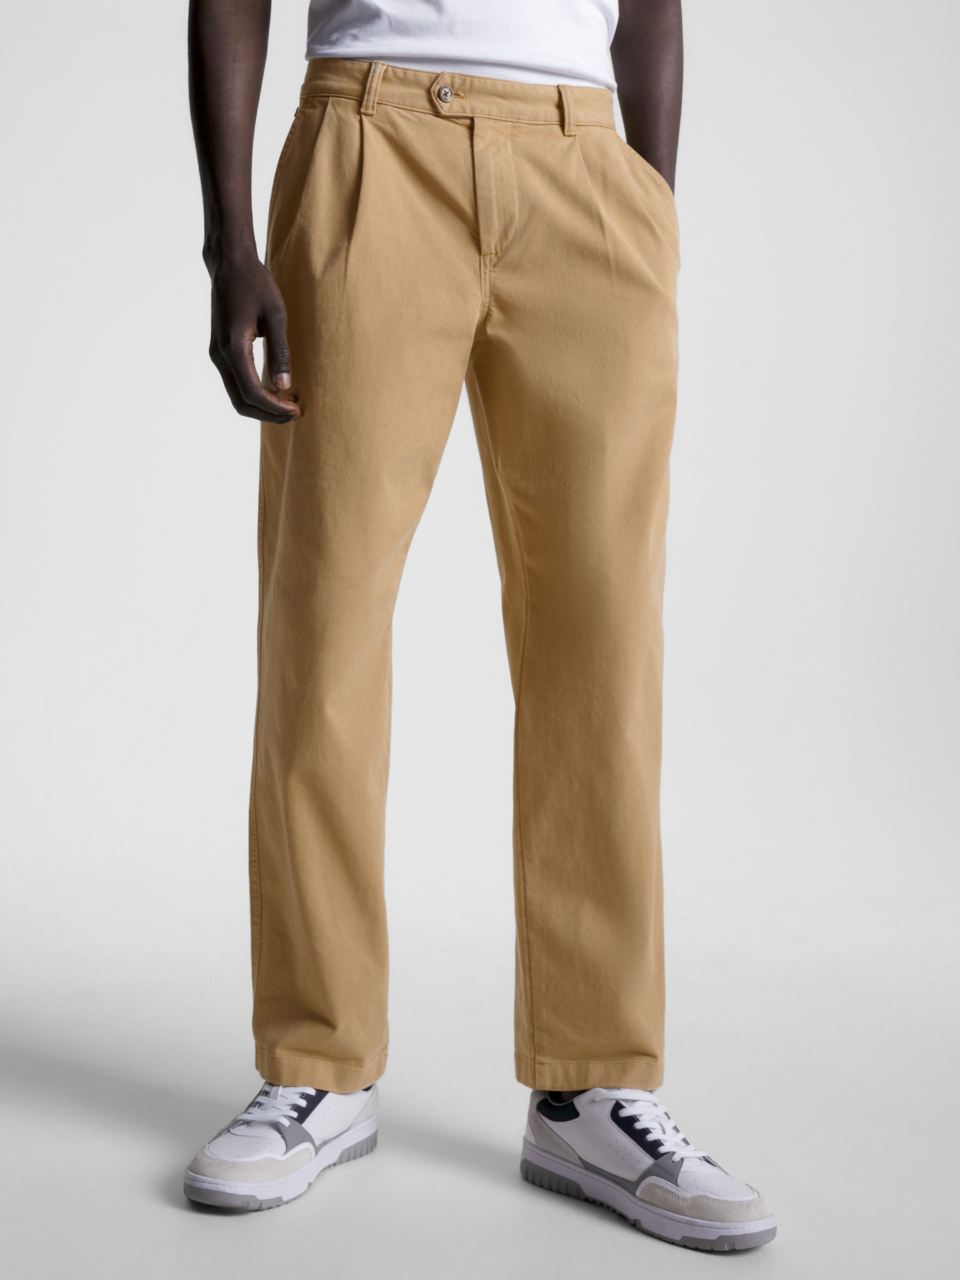 Length for chino or Khaki trousers 